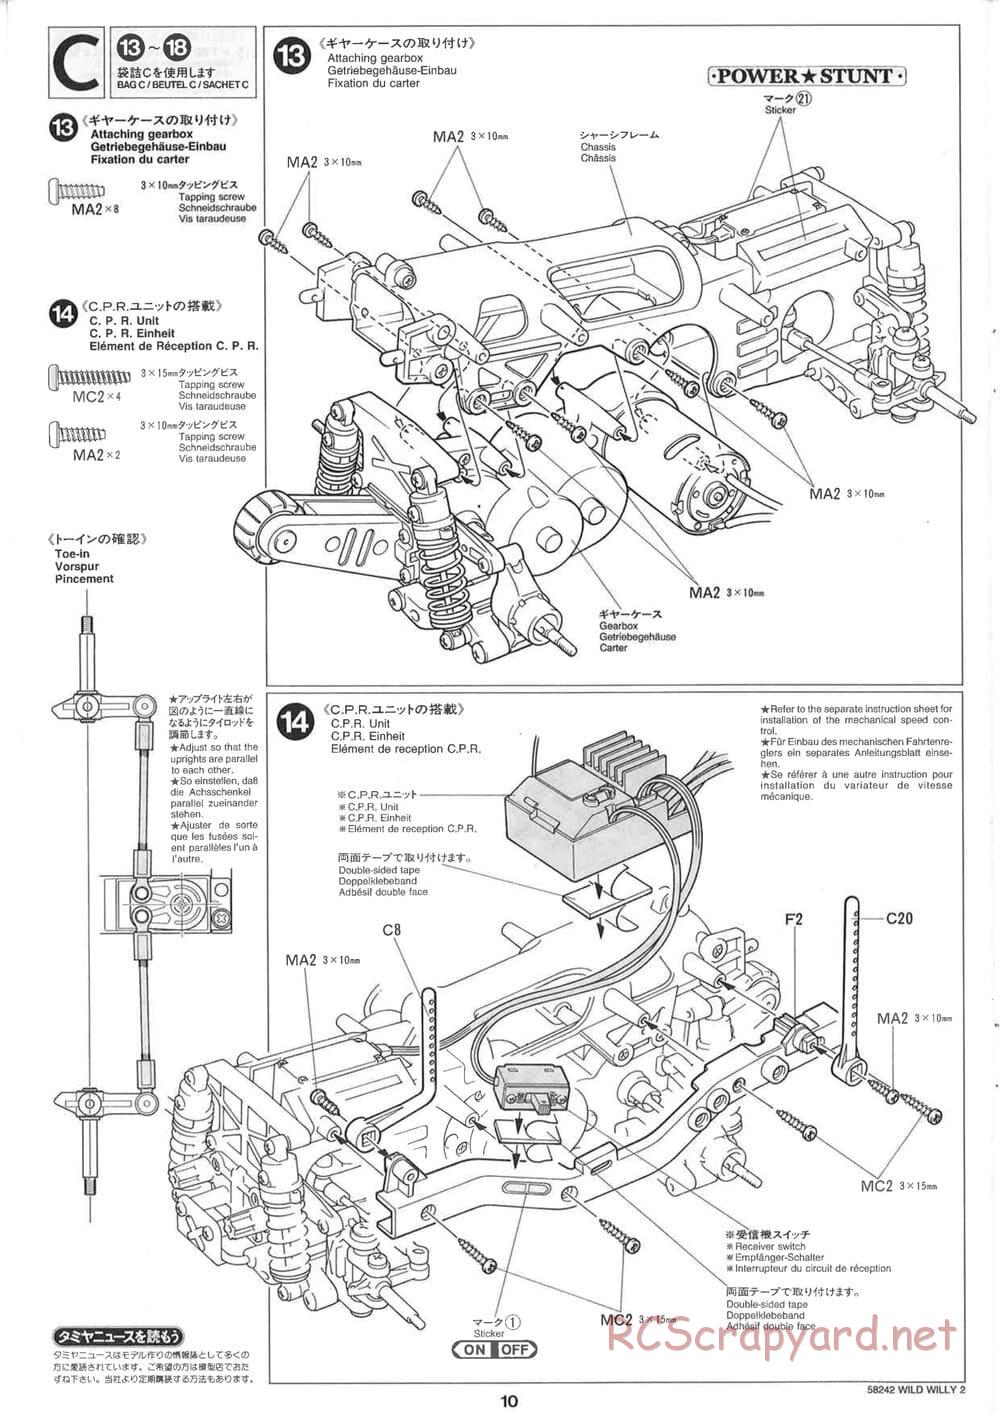 Tamiya - Wild Willy 2 - WR-02 Chassis - Manual - Page 10